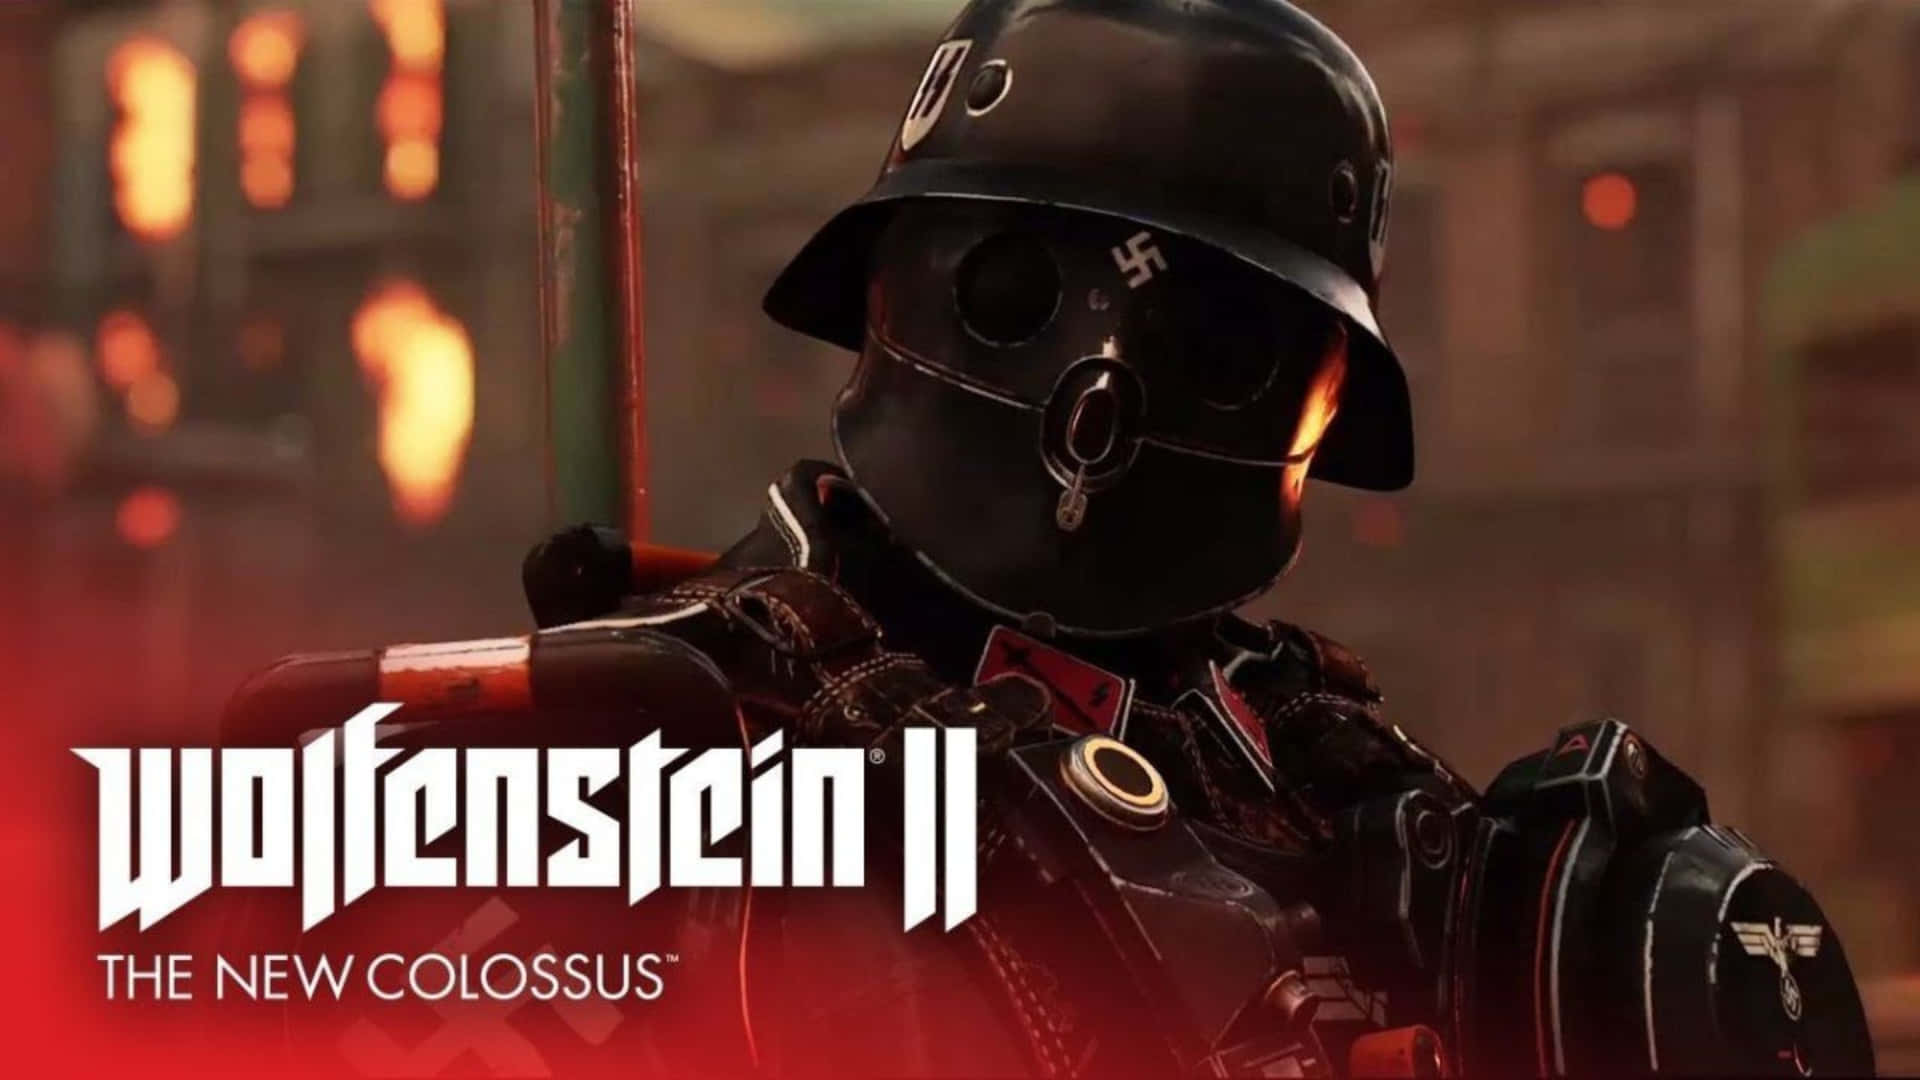 Marvel in the gothic beauty of Wolfenstein II's vibrant environment